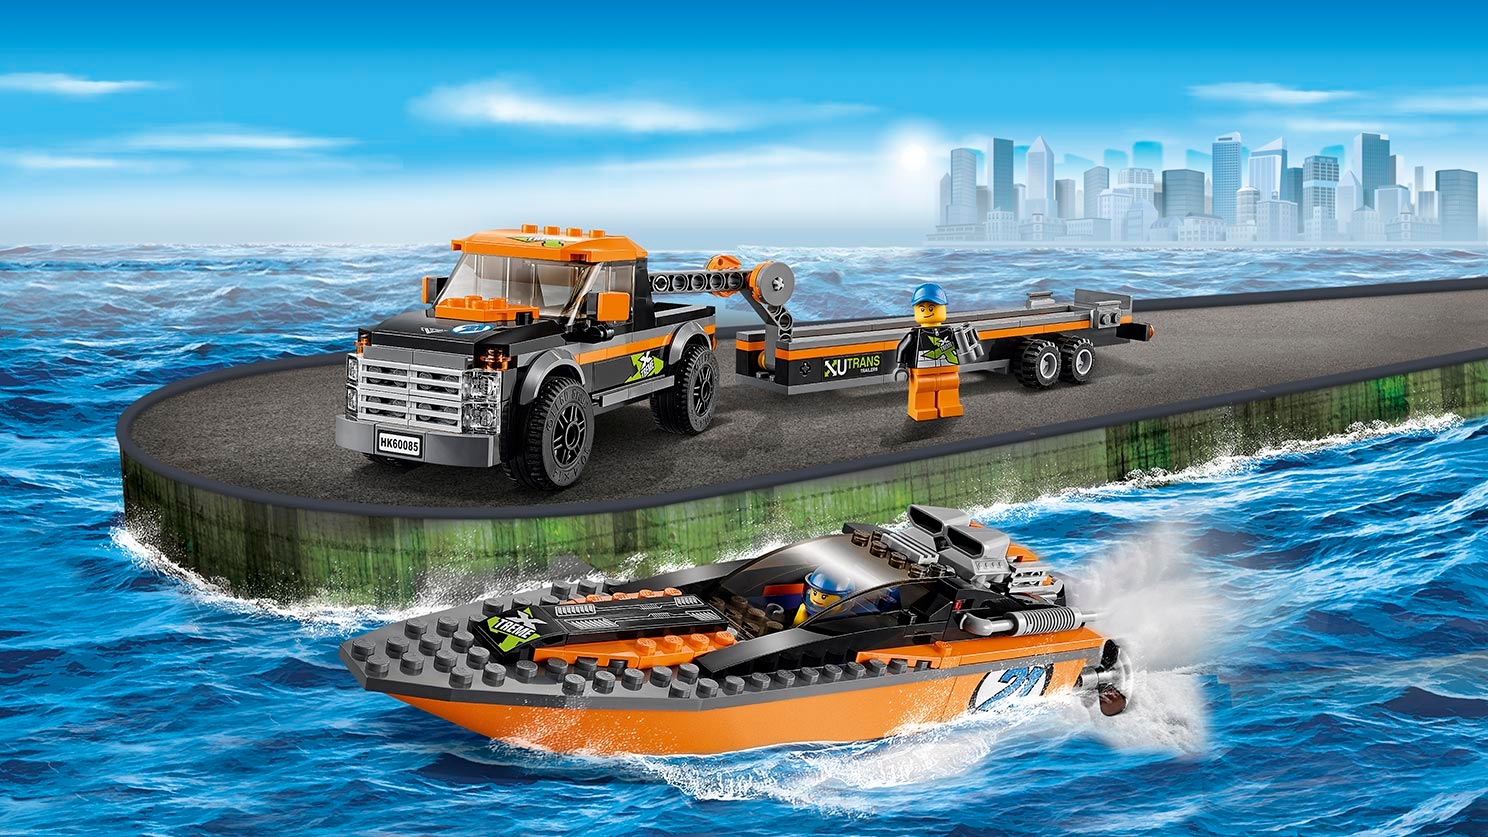 lego 60085 city 4x4 with powerboat